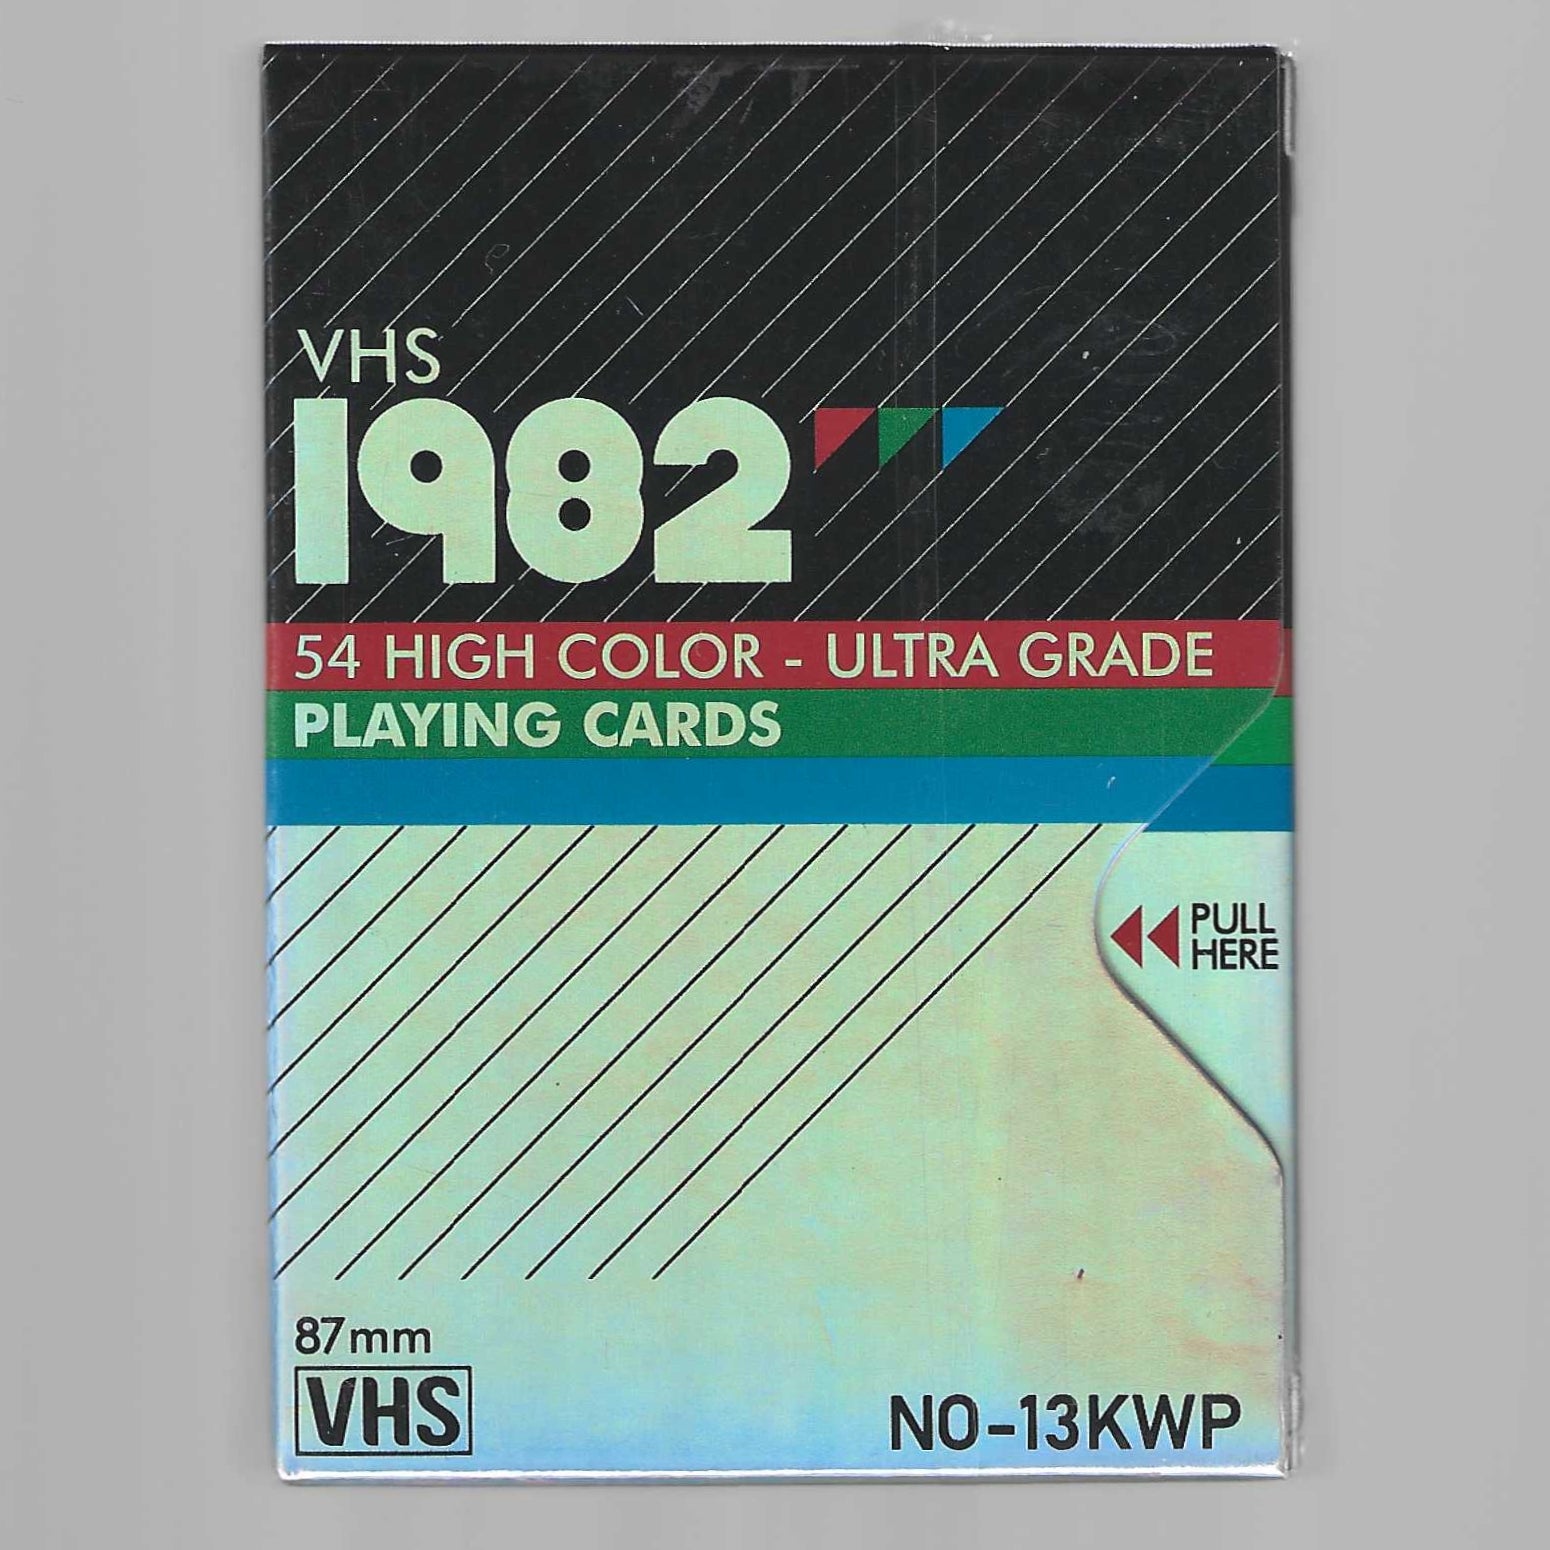 VHS 1982 (Holographic) [AUCTION]